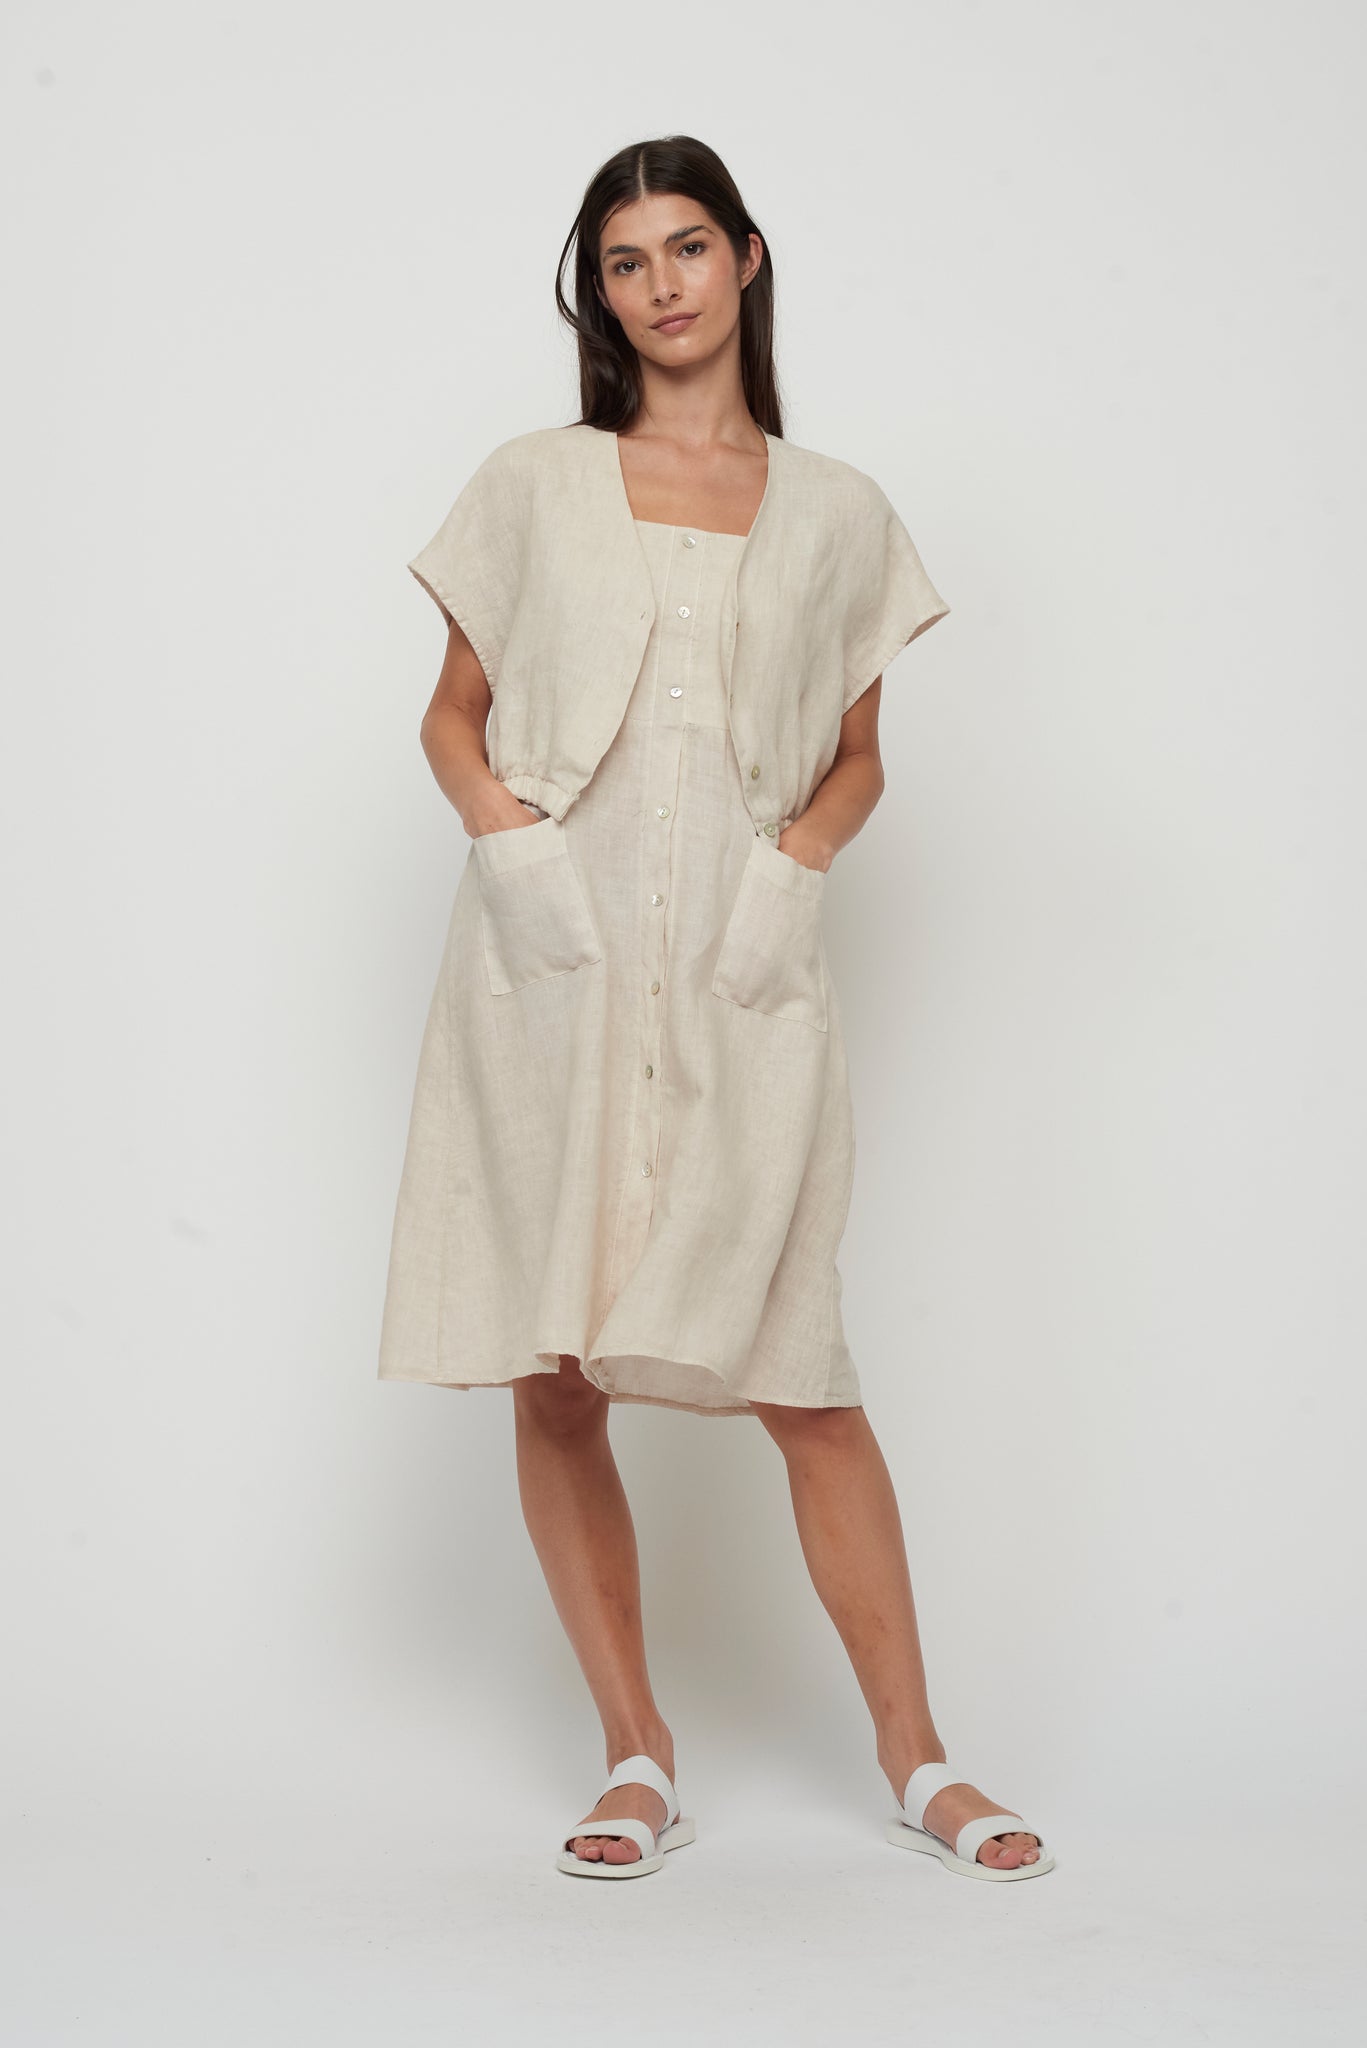 Cropped Linen Top w/ Elastic Bottom